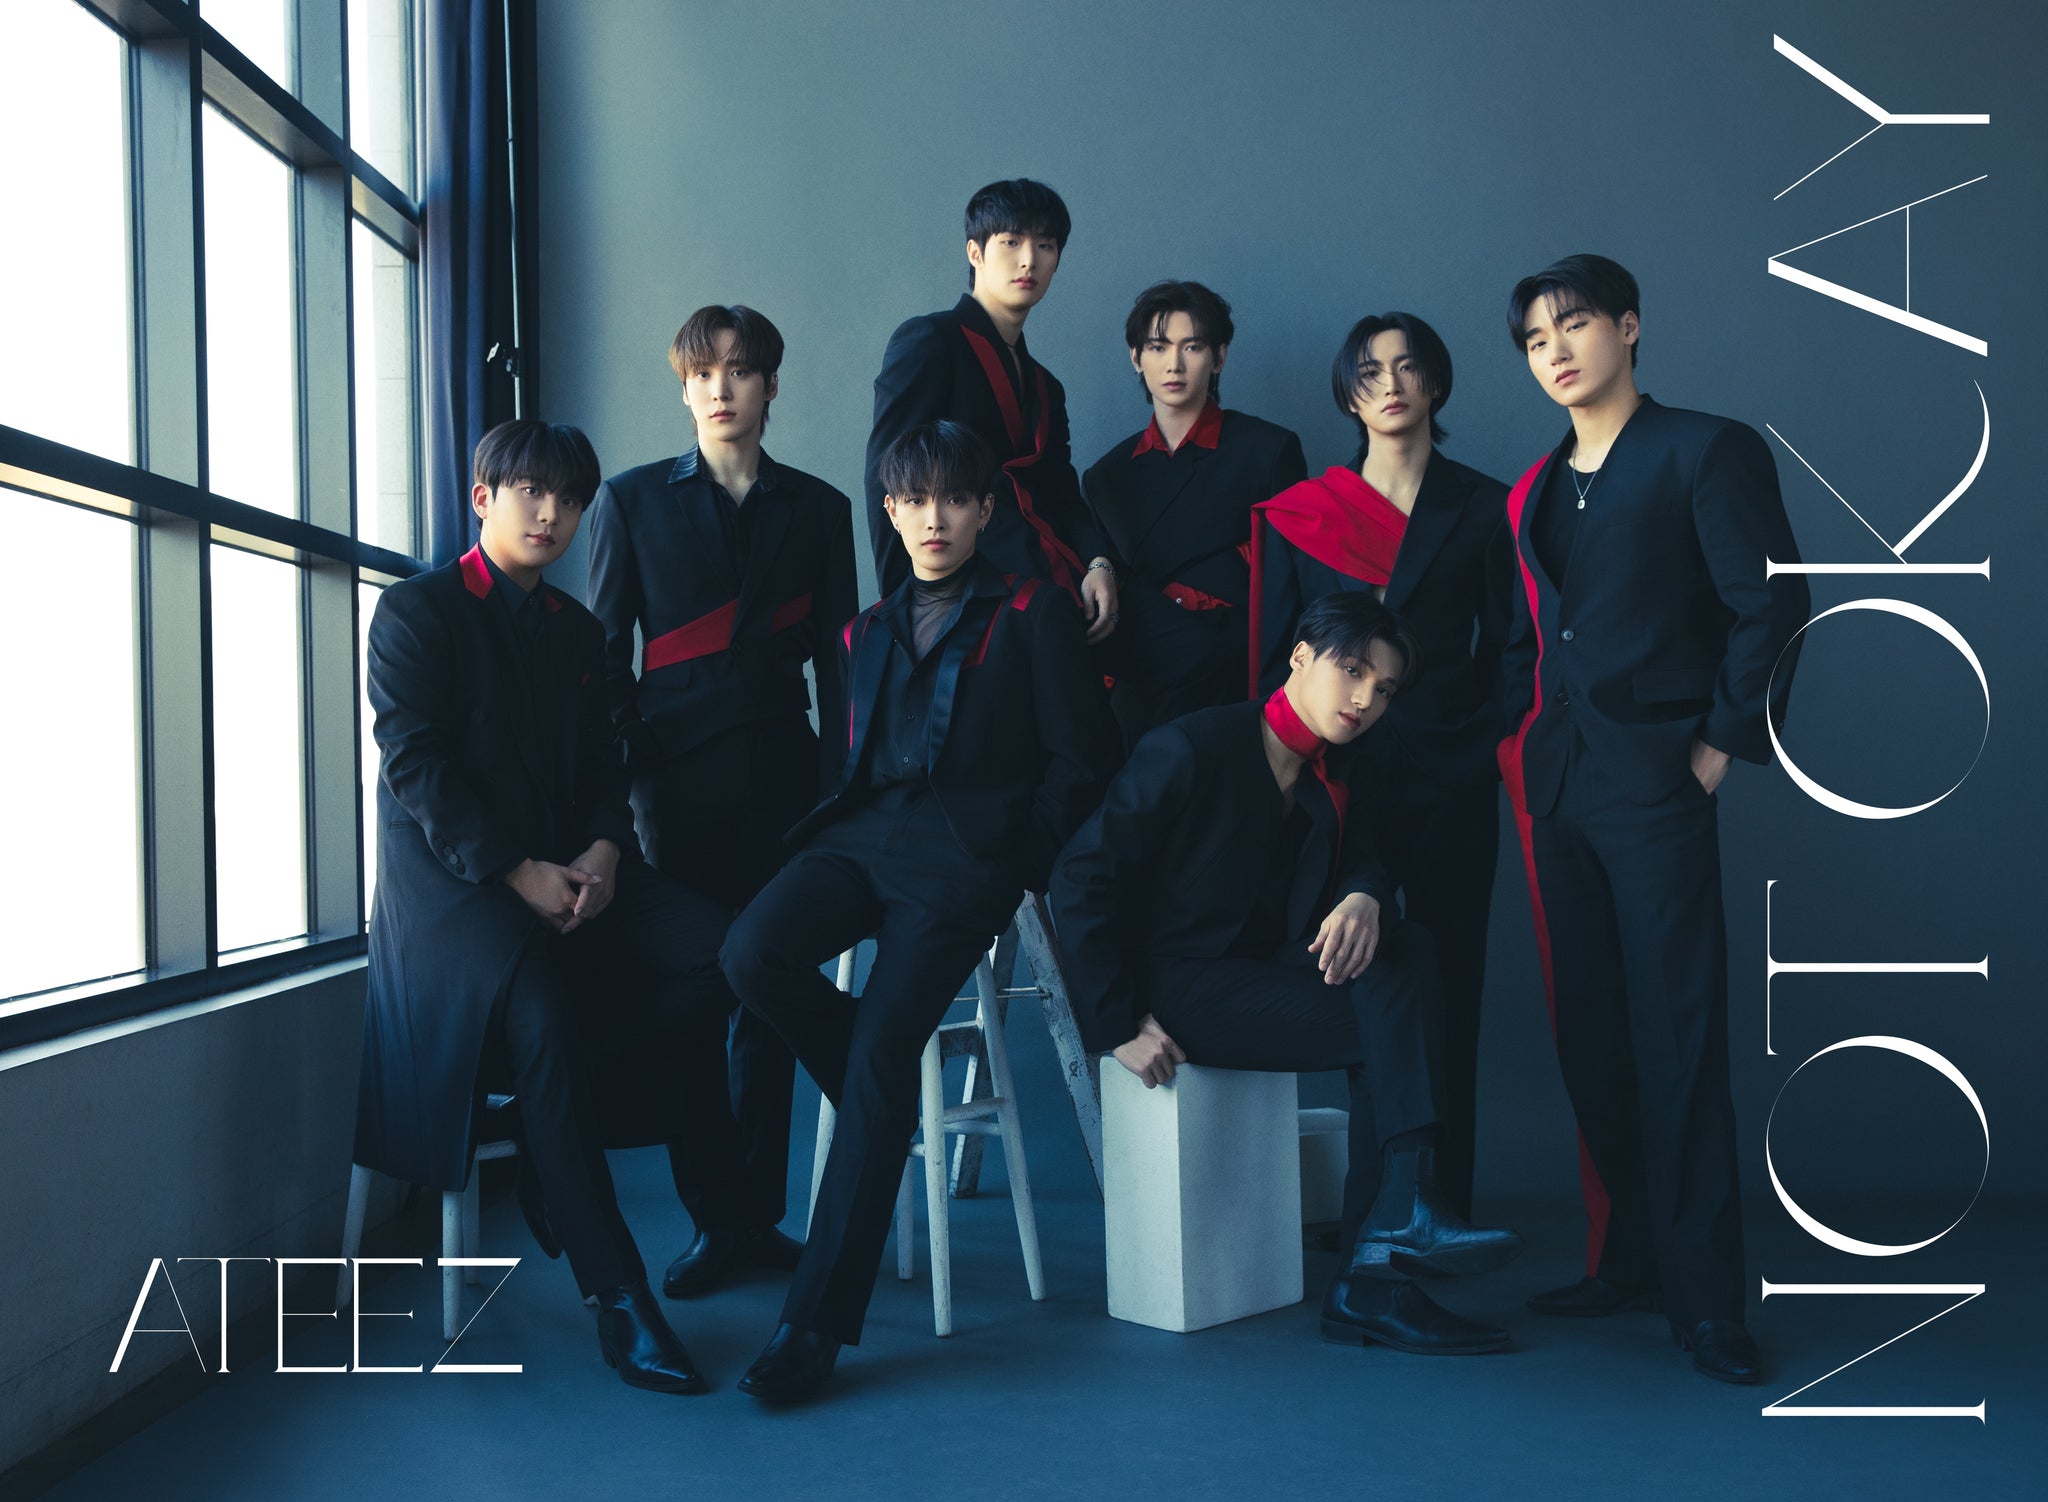 [Kpop Planet News] ATEEZ To Release News Japanese Single In February